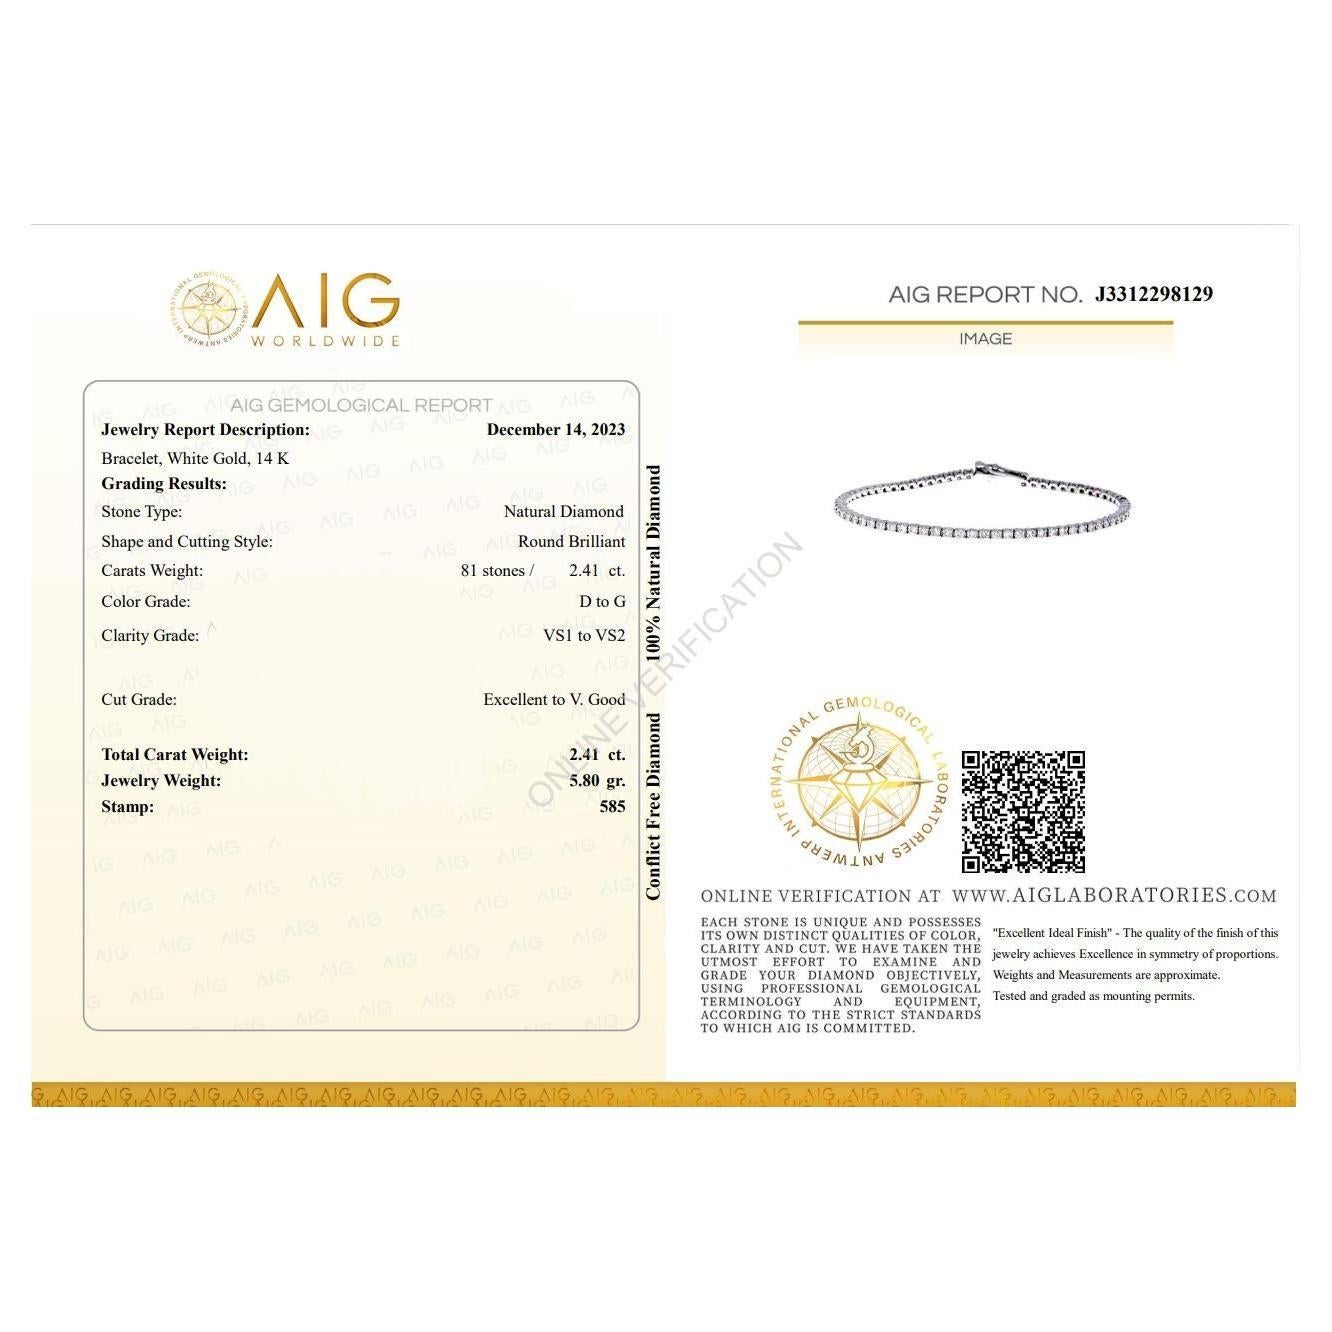 Side Stones:
___________
Natural Diamonds
Cut: Round Brilliant
Carat: 2.41 cttw / 81 stones
Color: D to G
Clarity: VS1 to VS2

Item ships from Israeli Diamonds Exchange, customers are responsible for any local customs or VAT fees that might apply to